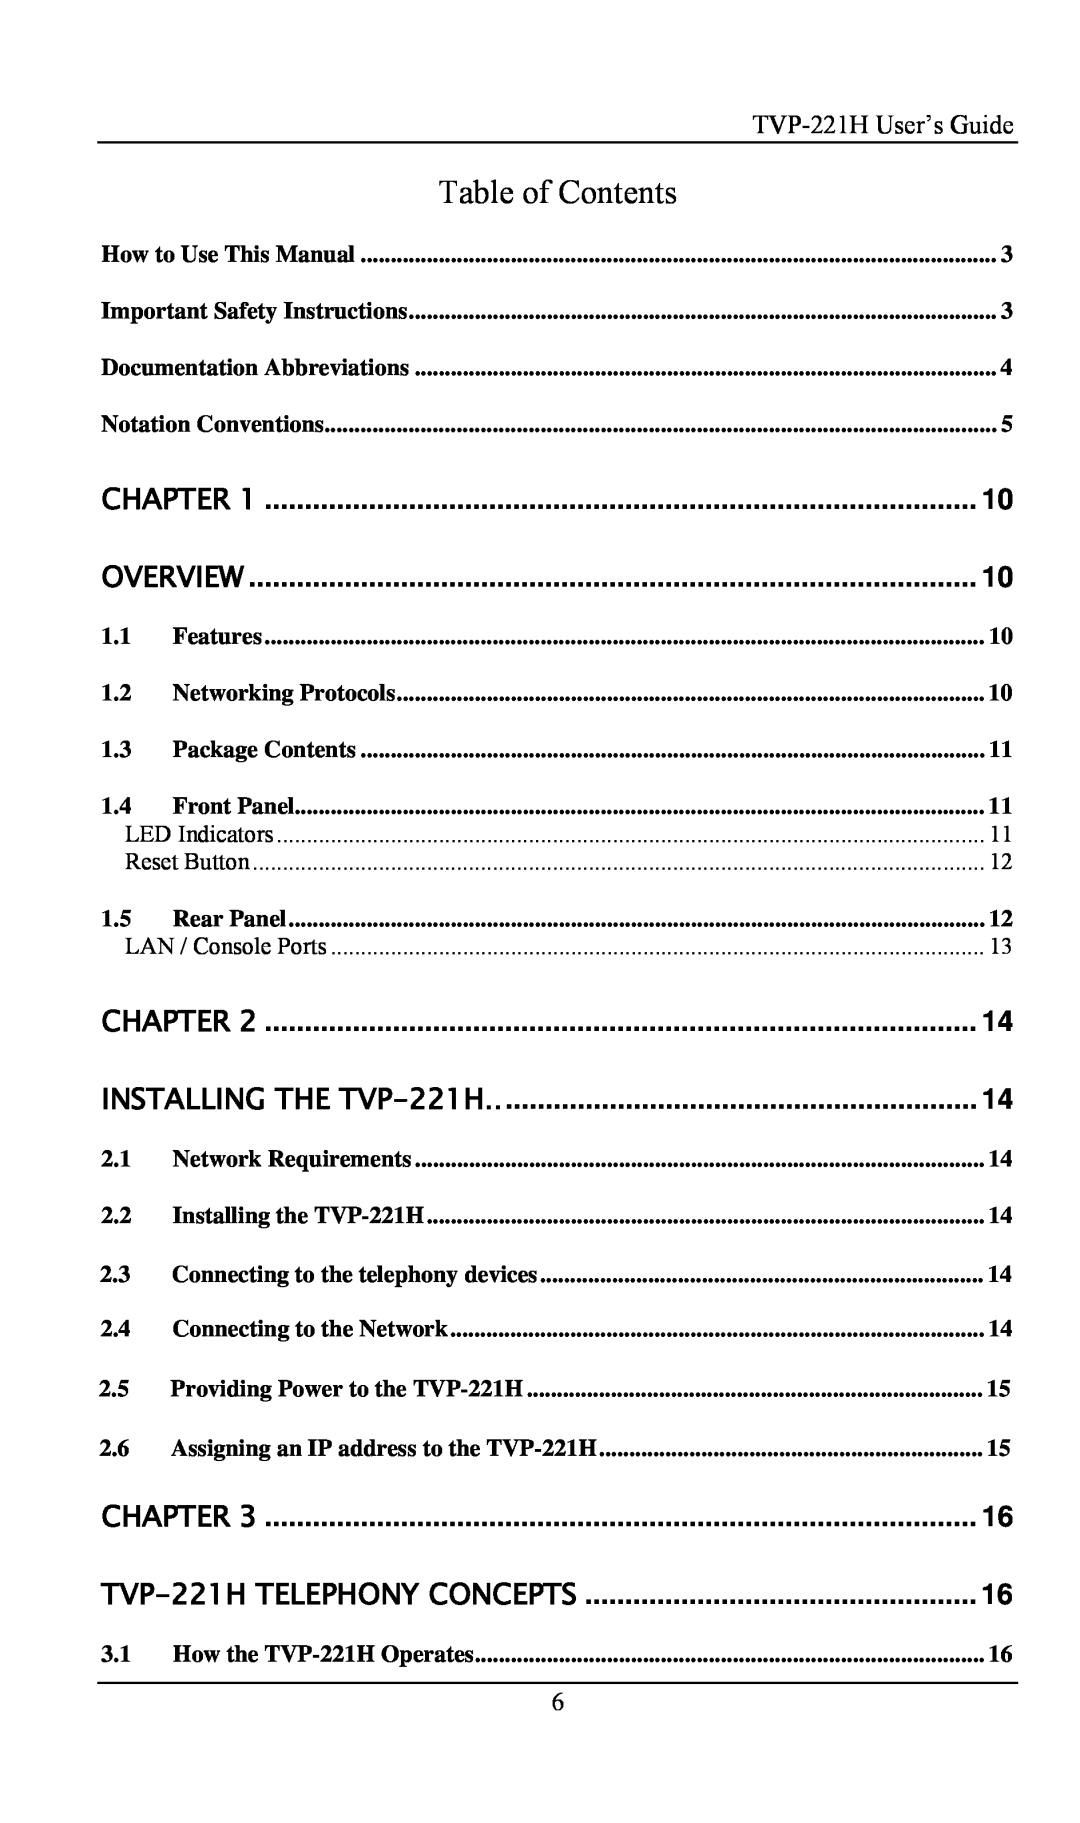 TRENDnet TVP- 221H, VoIP Gateway manual Table of Contents, TVP-221H User’s Guide, Chapter, Overview, INSTALLING THE TVP-221H 